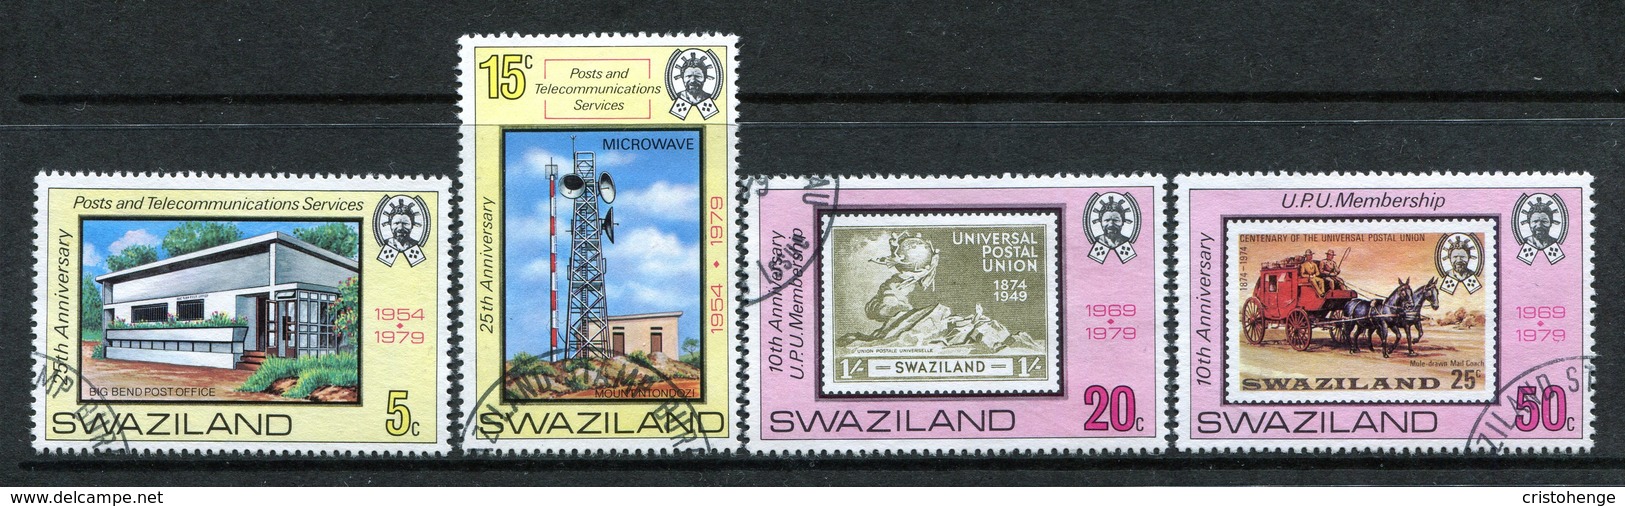 Swaziland 1979 Post Office Anniversaries Set Used (SG 332-335) - Swaziland (1968-...)